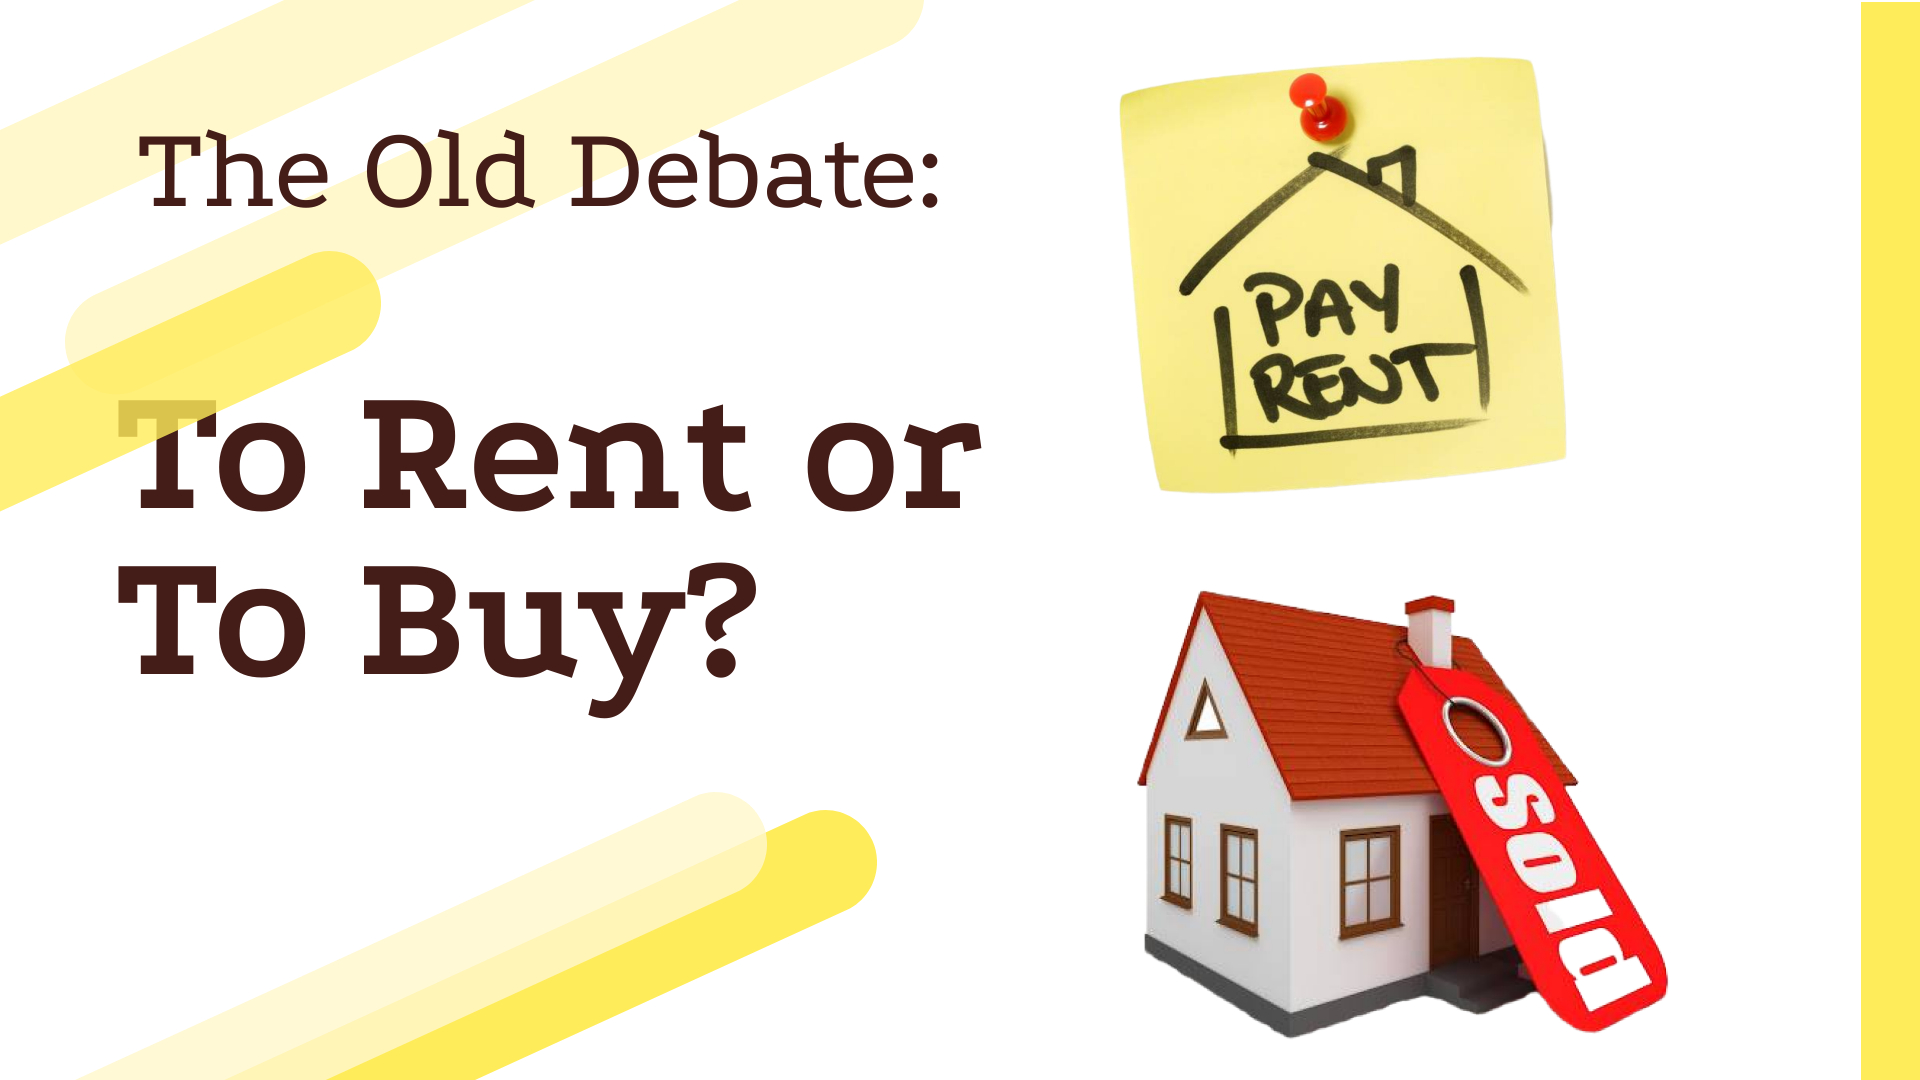 To Rent or To Buy?